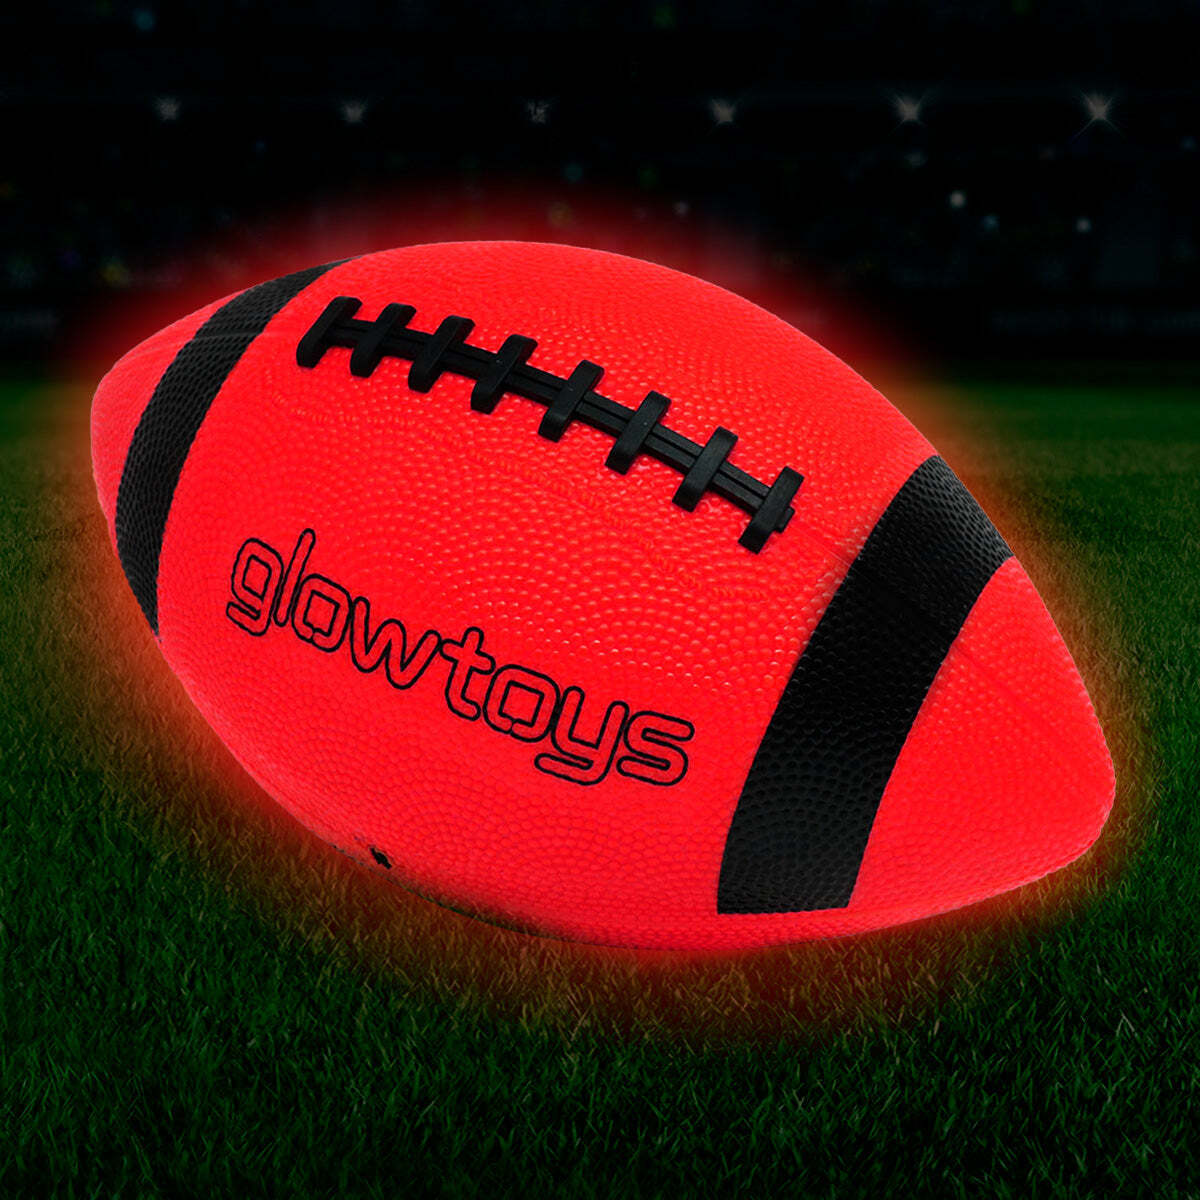 LED Light Up Gridiron Football Impact Activated Glow in the Dark Pump Included